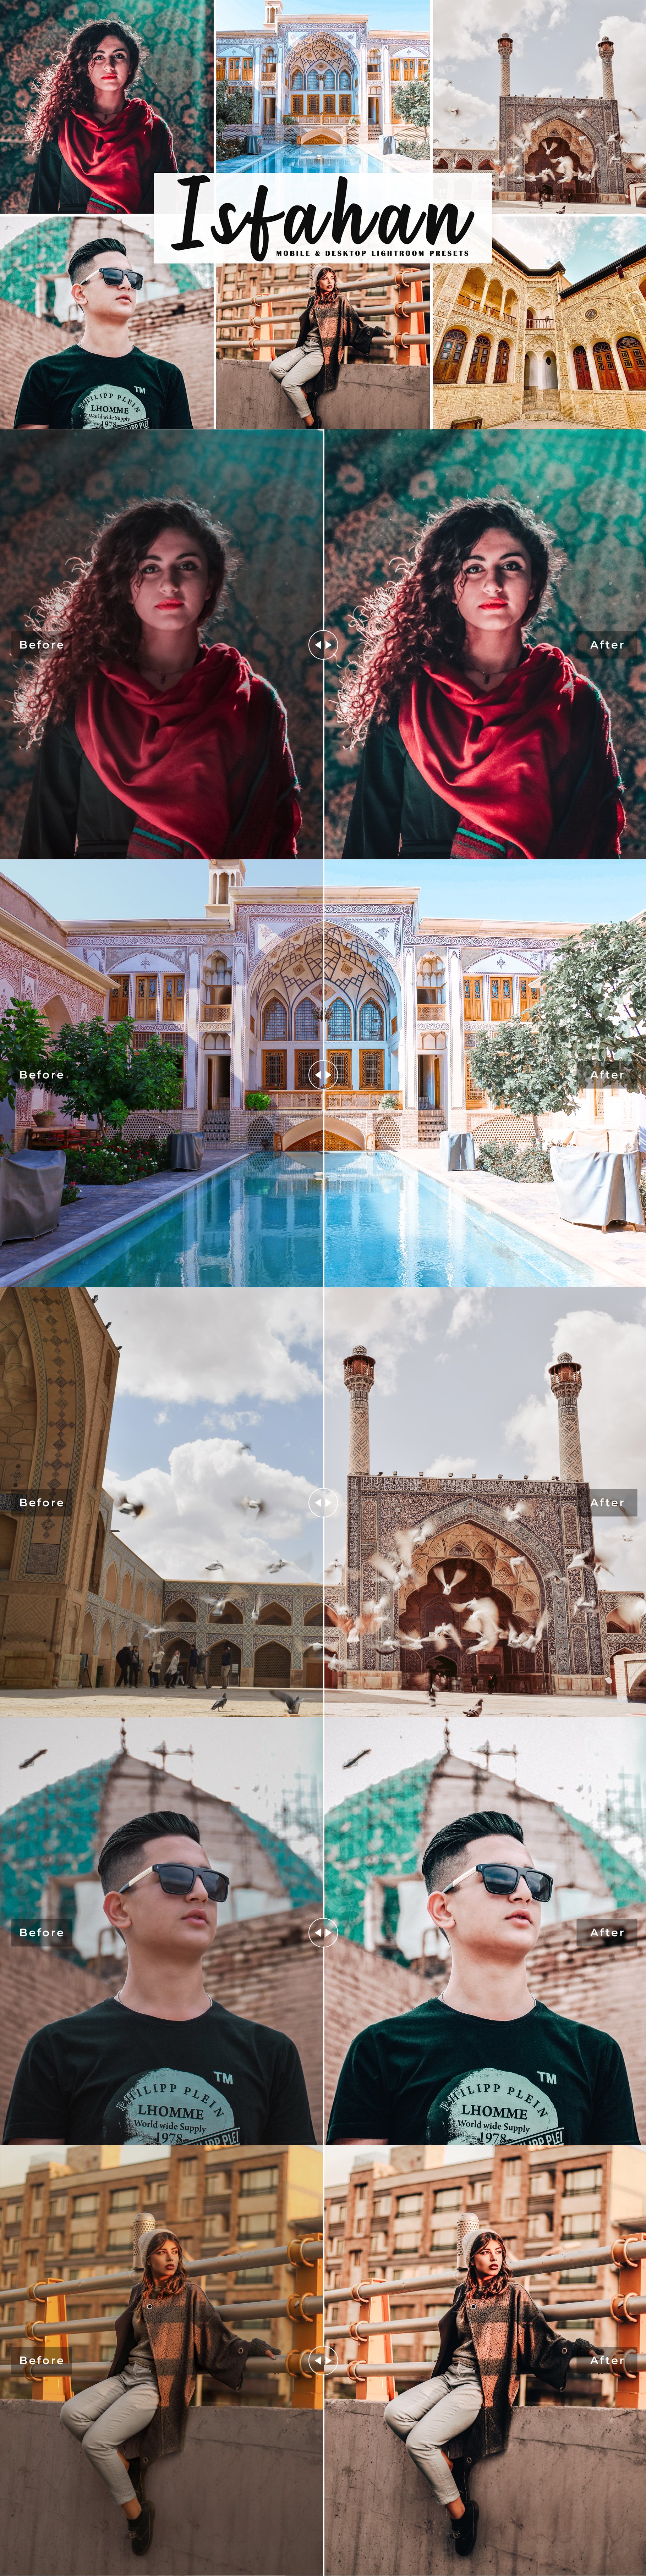 Isfahan Lightroom Presets Packcover image.